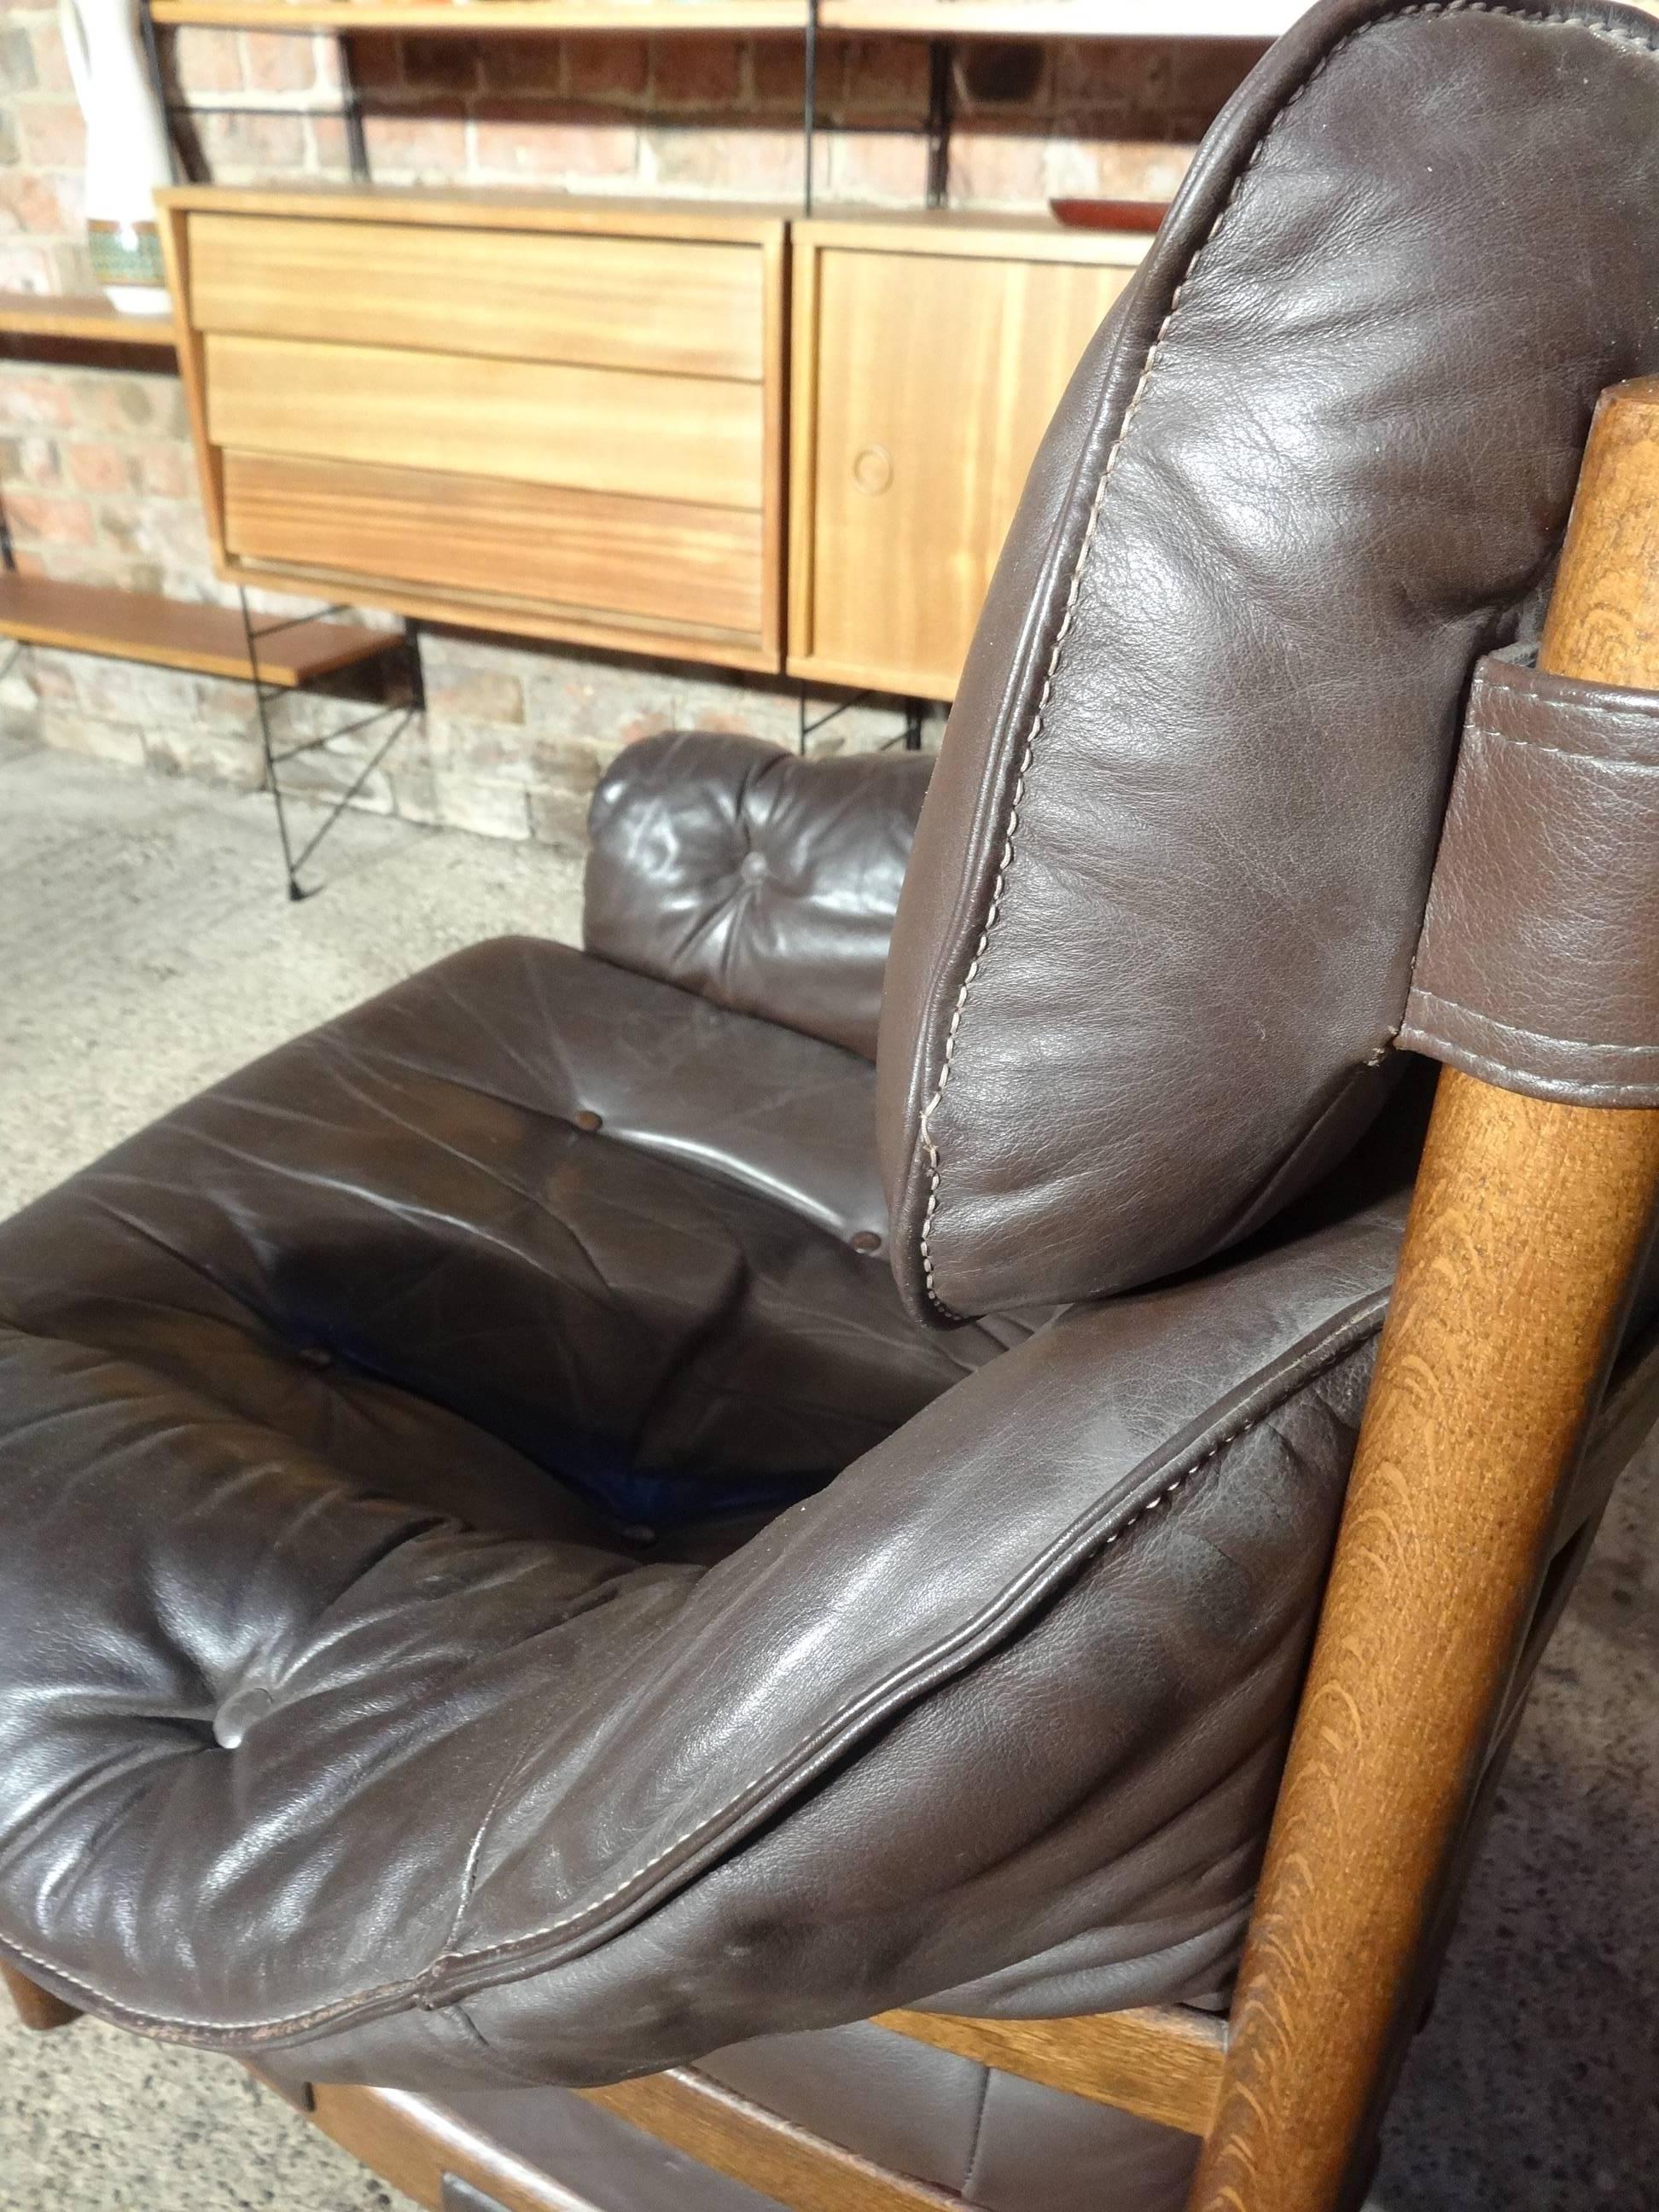 Great Arne Norell brown leather chair in mint condition, leather is mint condition, this Classic Danish sofa are the antiques of the future and look great in any decor.

Measures: Seat height: 45cm, height: 70cm, depth: 88cm, width: 85cm.